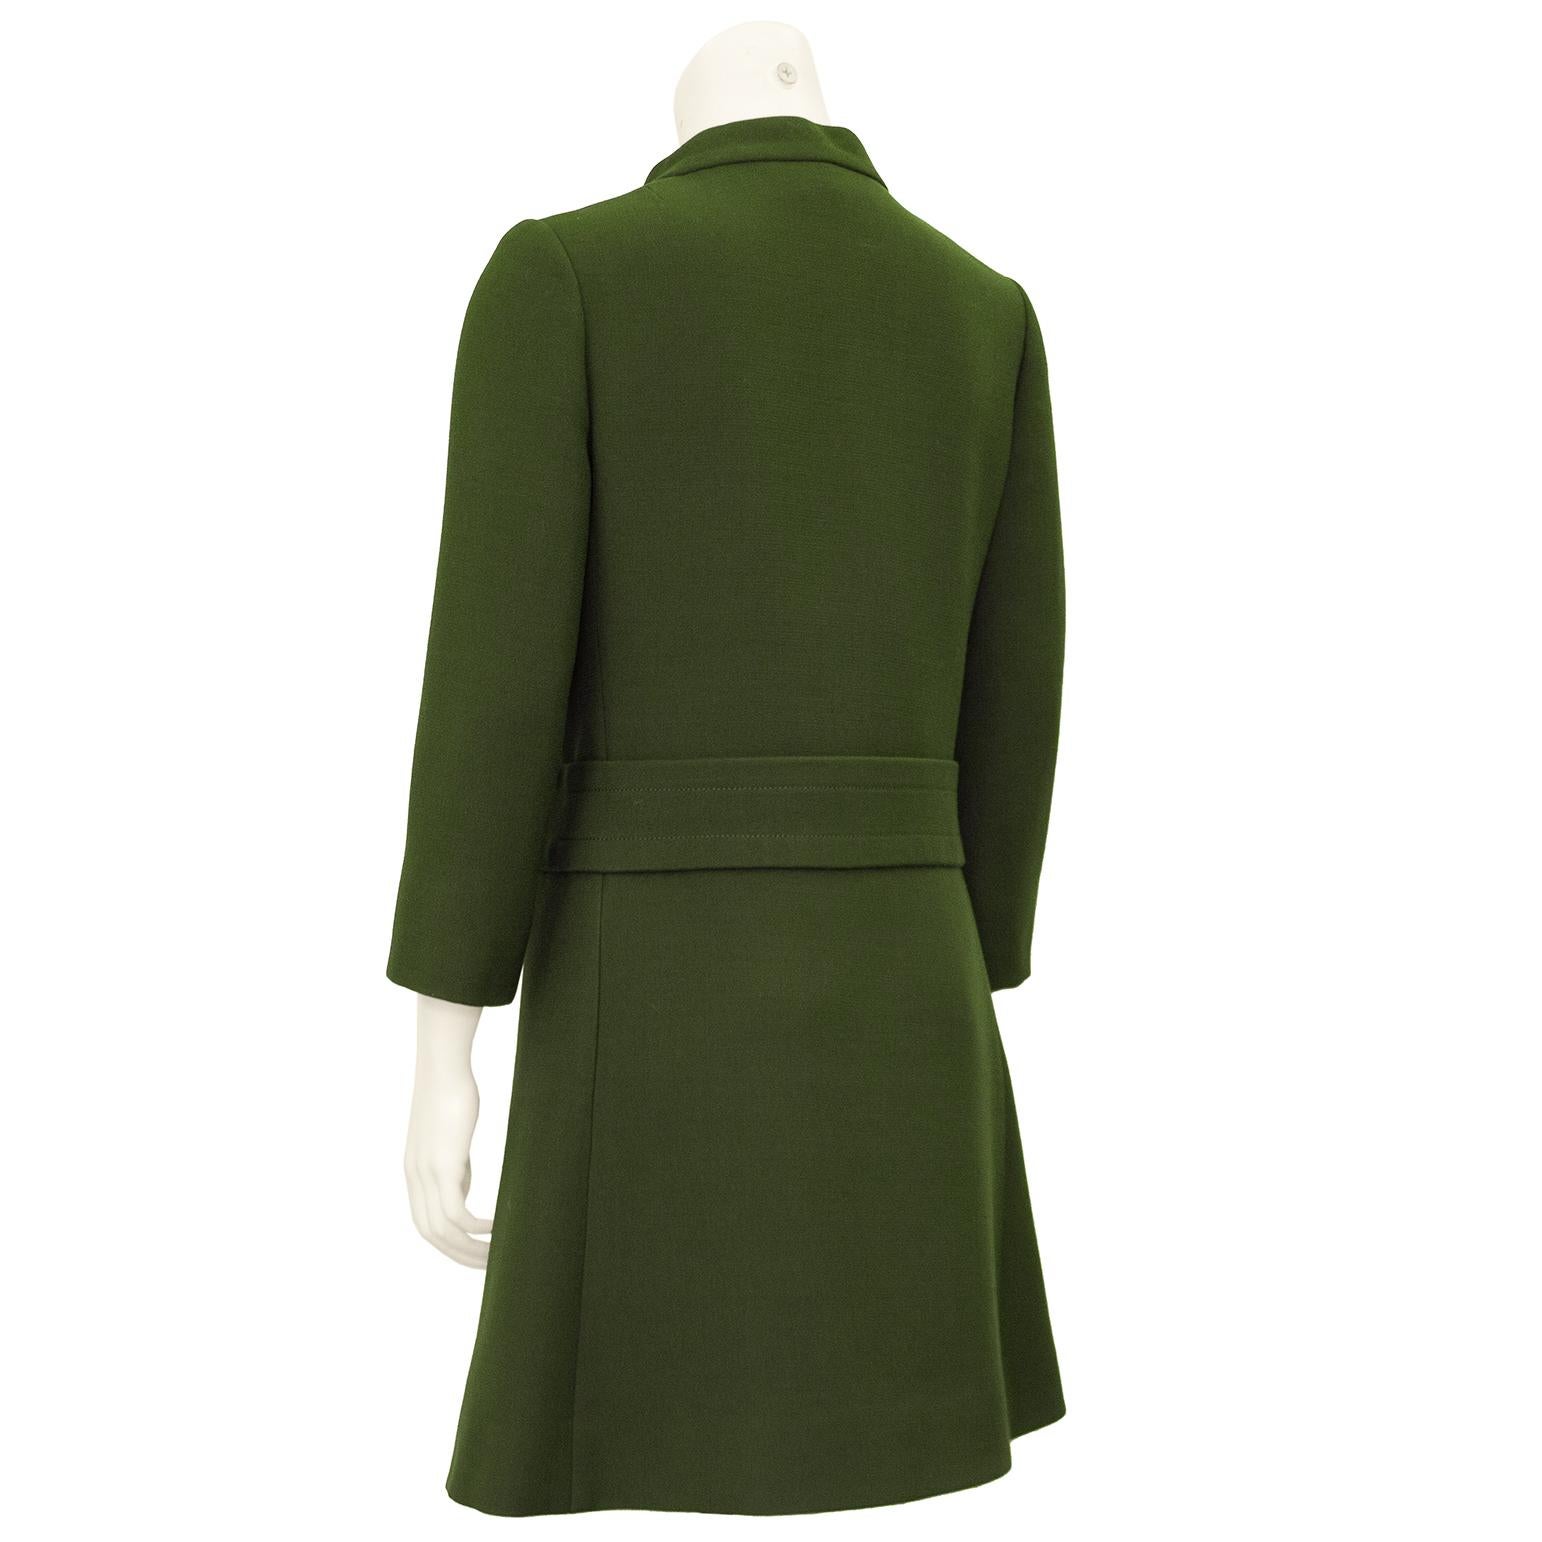 1960s Pierre Cardin Olive Green Mod Coatdress  In Good Condition For Sale In Toronto, Ontario